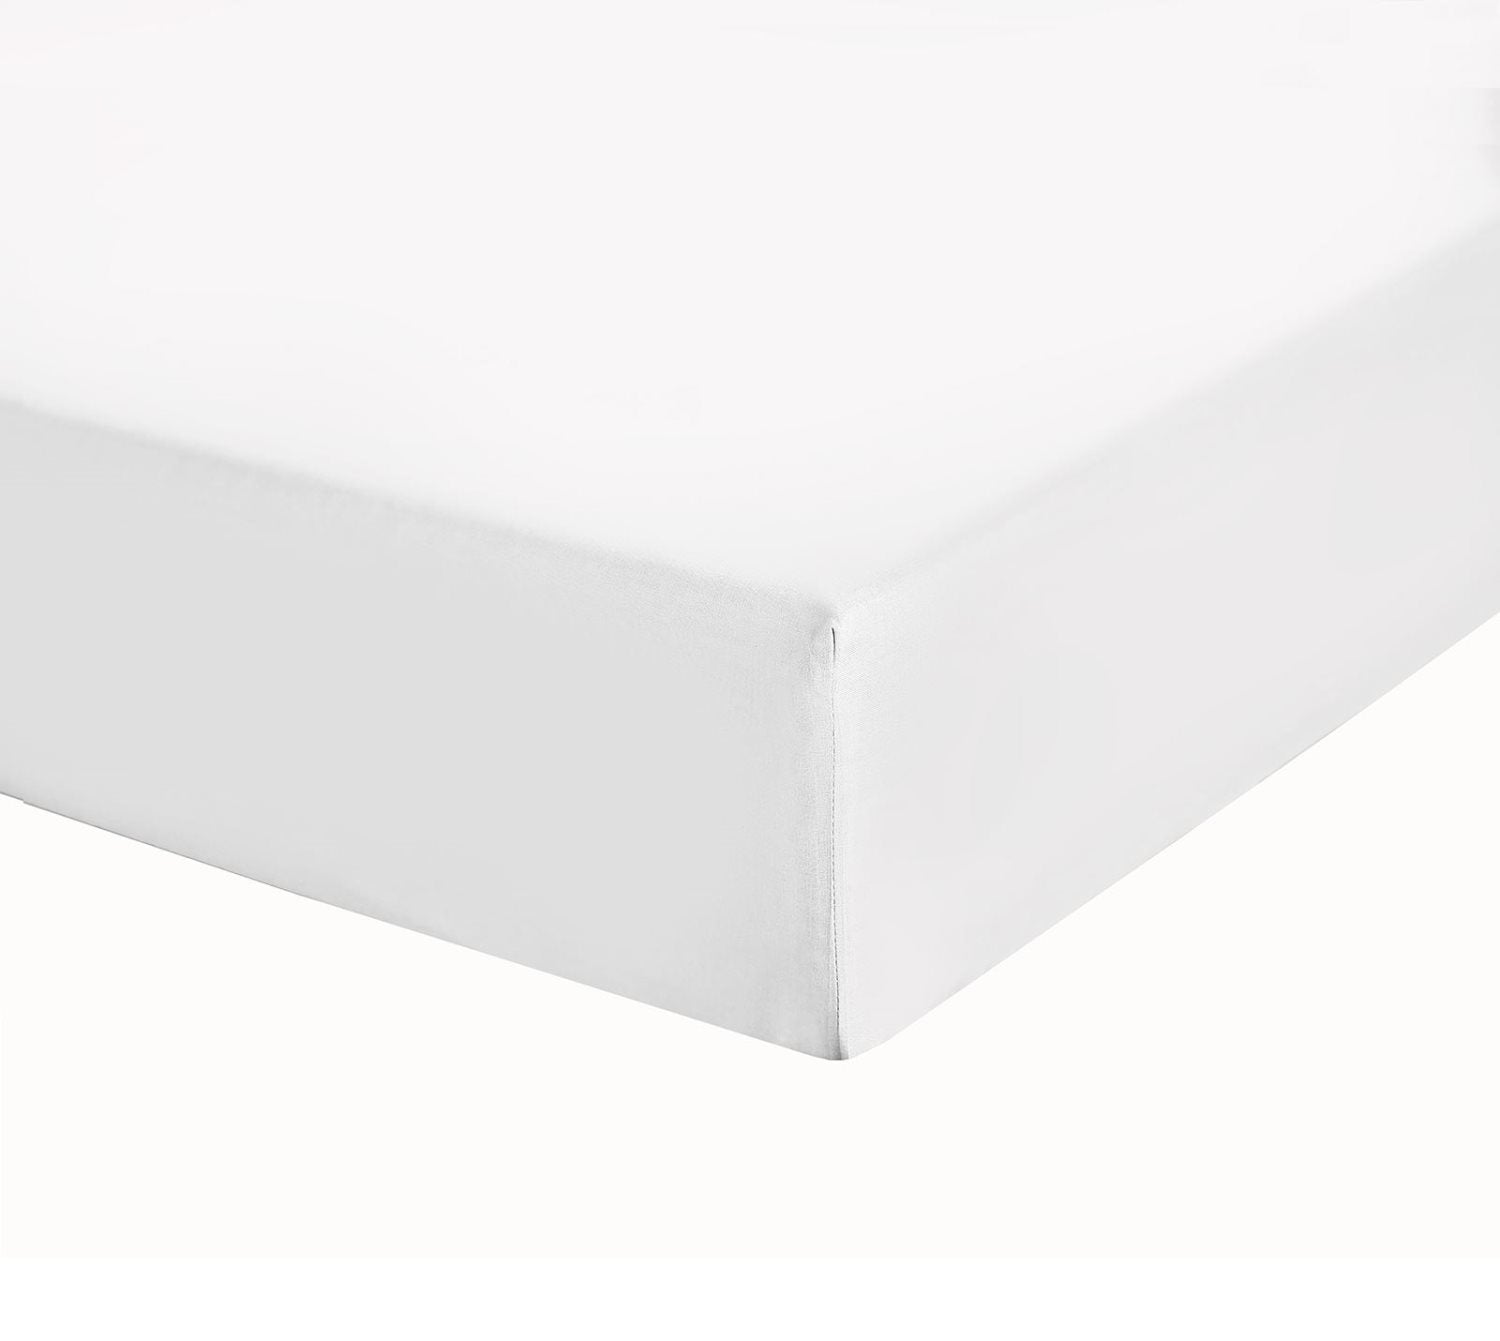 46cm king size fitted sheet white